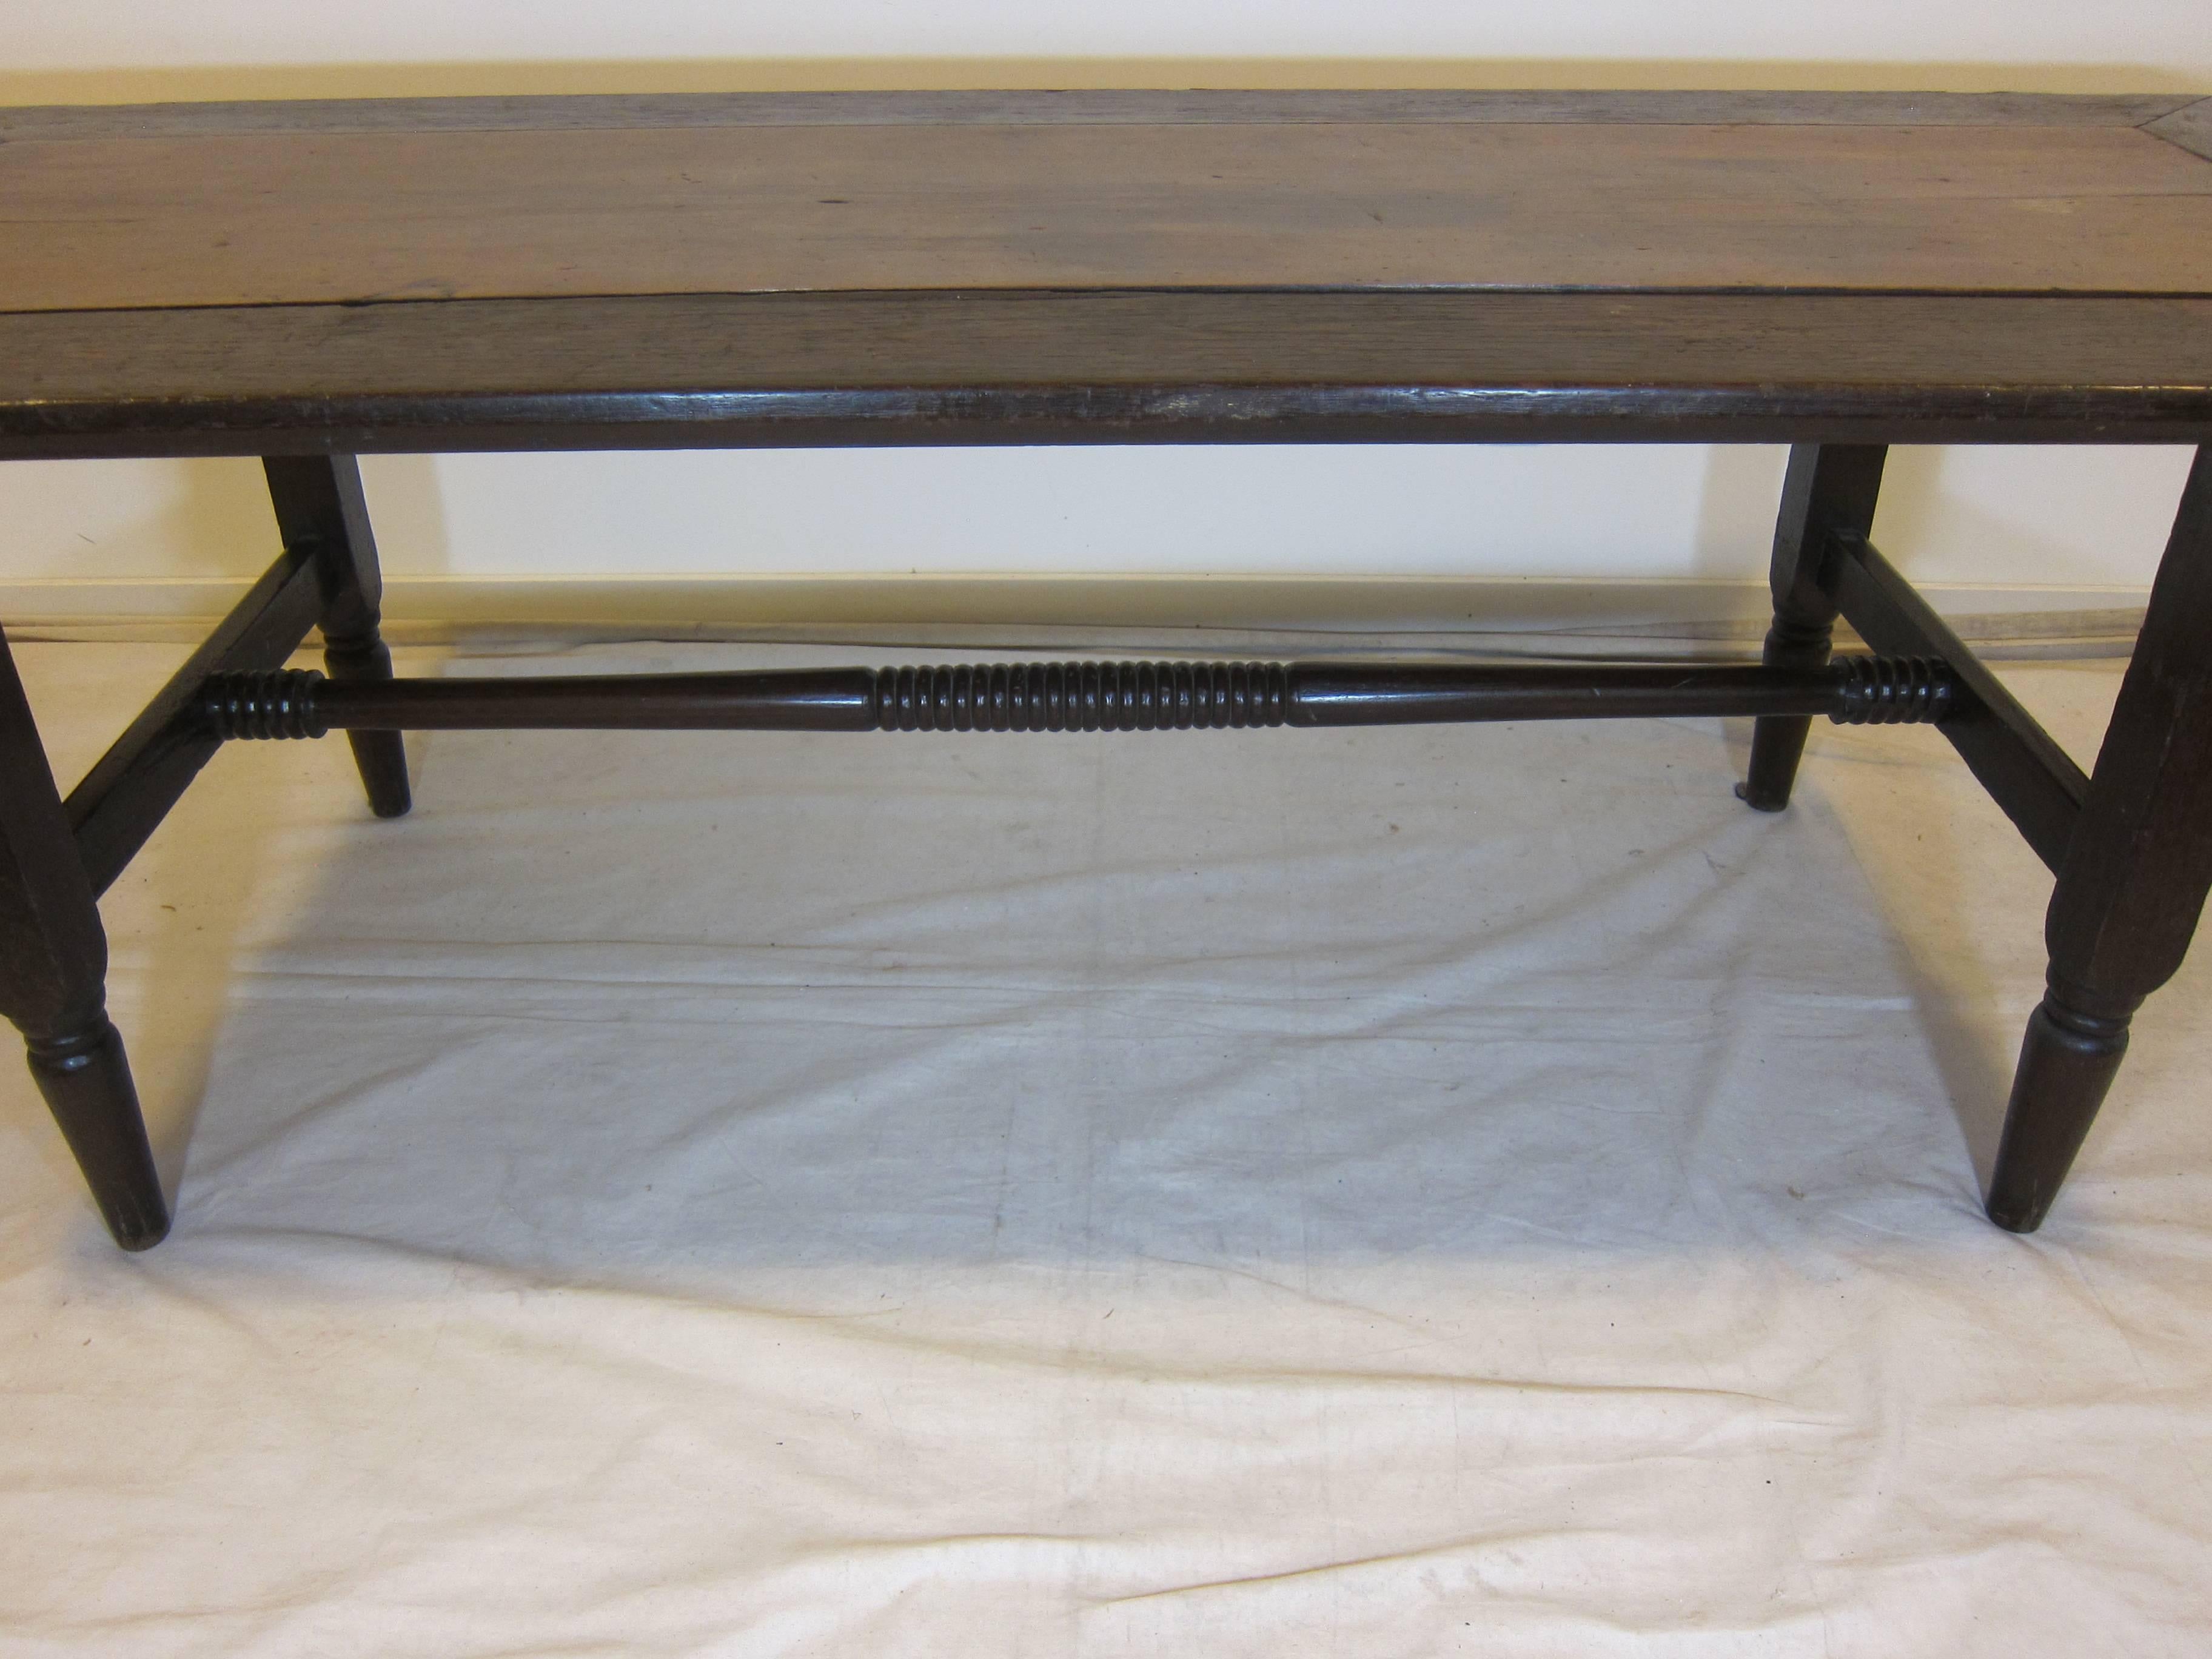 19th century refectory dining table made of Molave and Narra wood.
Spanish colony from the Philippines. The table has a frame of Narra wood with a Molave wood center on top. A center trestle exhibits carved turned center and end. Table is in good